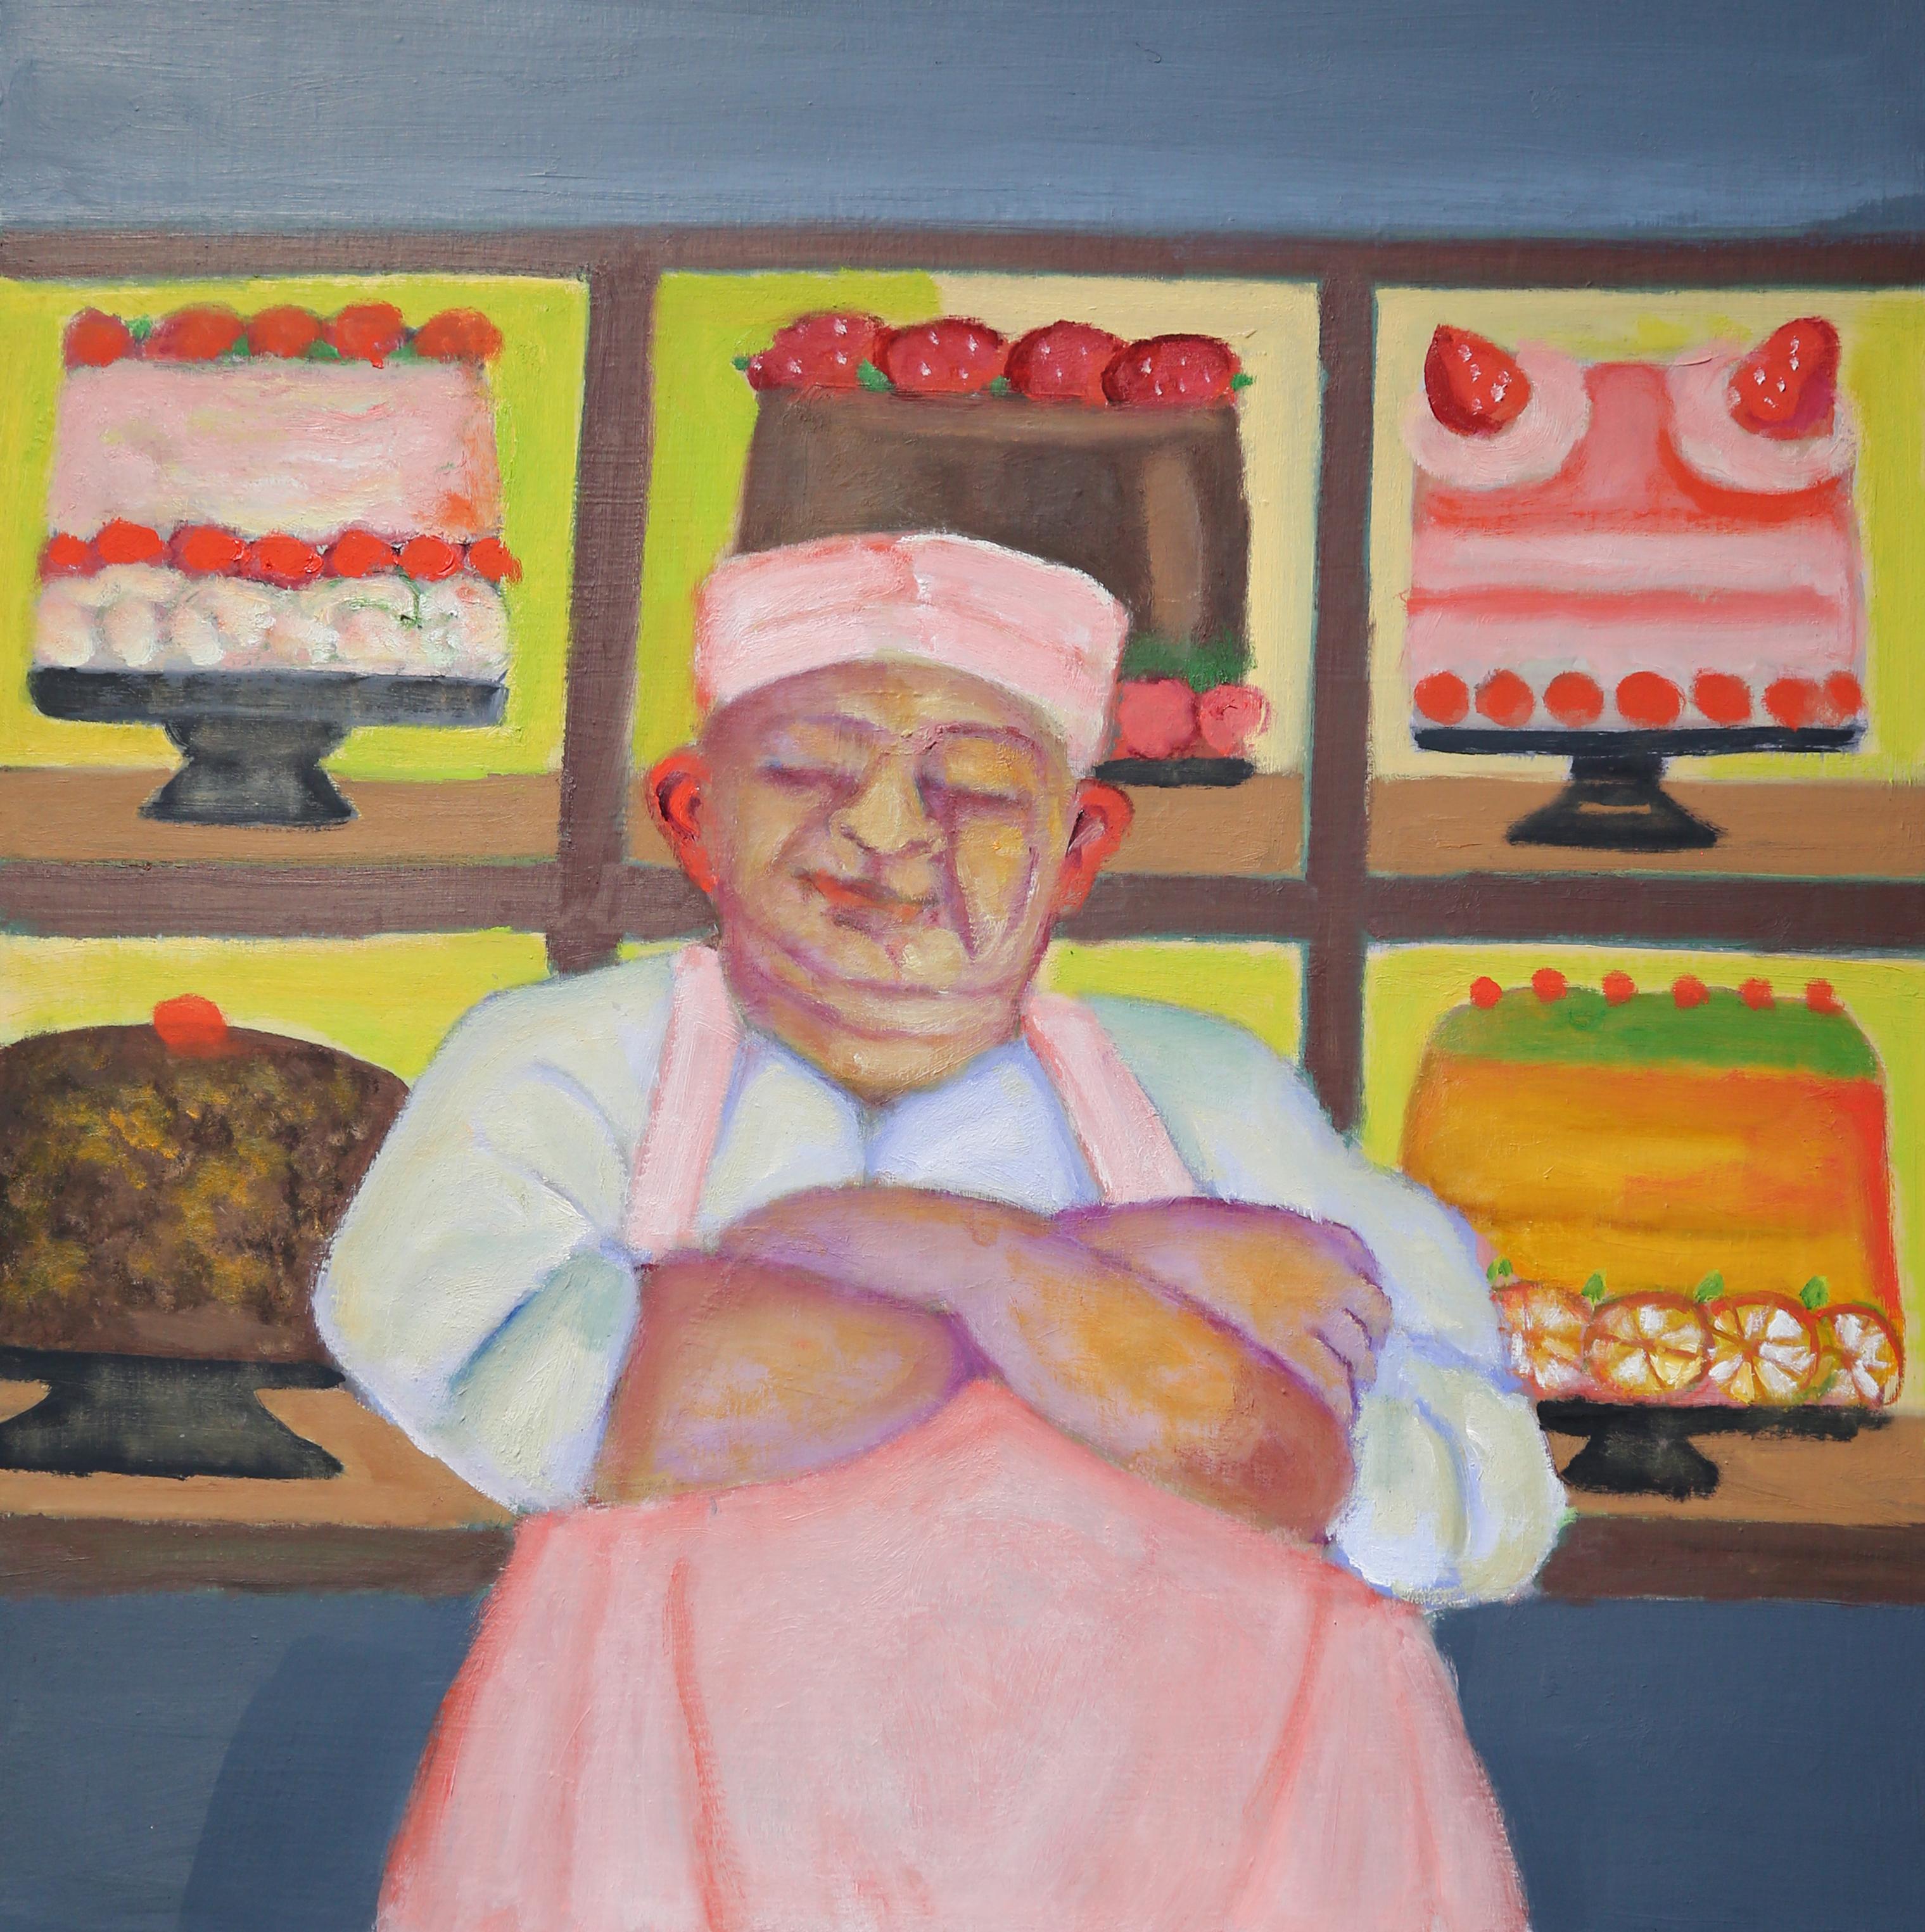 Stephen Basso Figurative Painting - Pastry chef food cooking theme sweet color figure resembles delicious cakes 